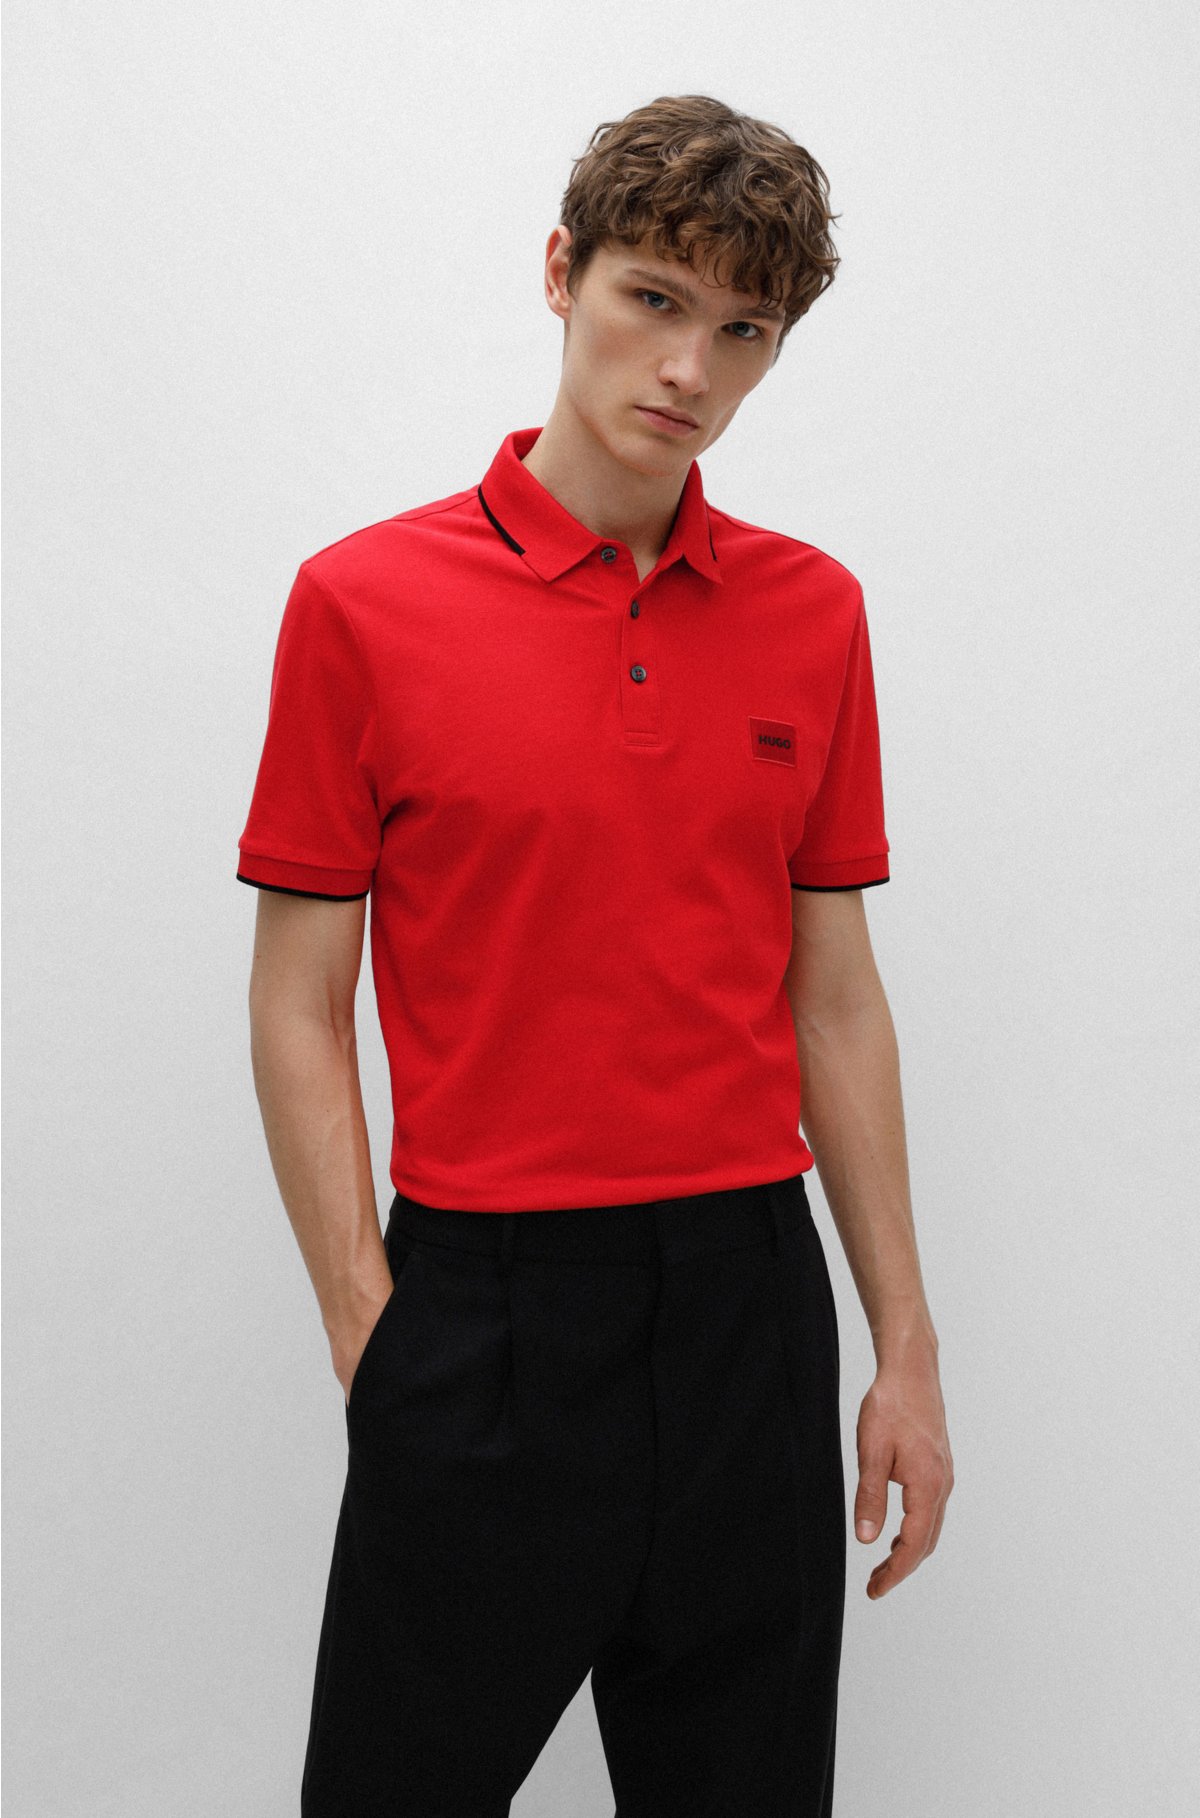 HUGO - polo shirt slim-fit label with Cotton-piqué red logo